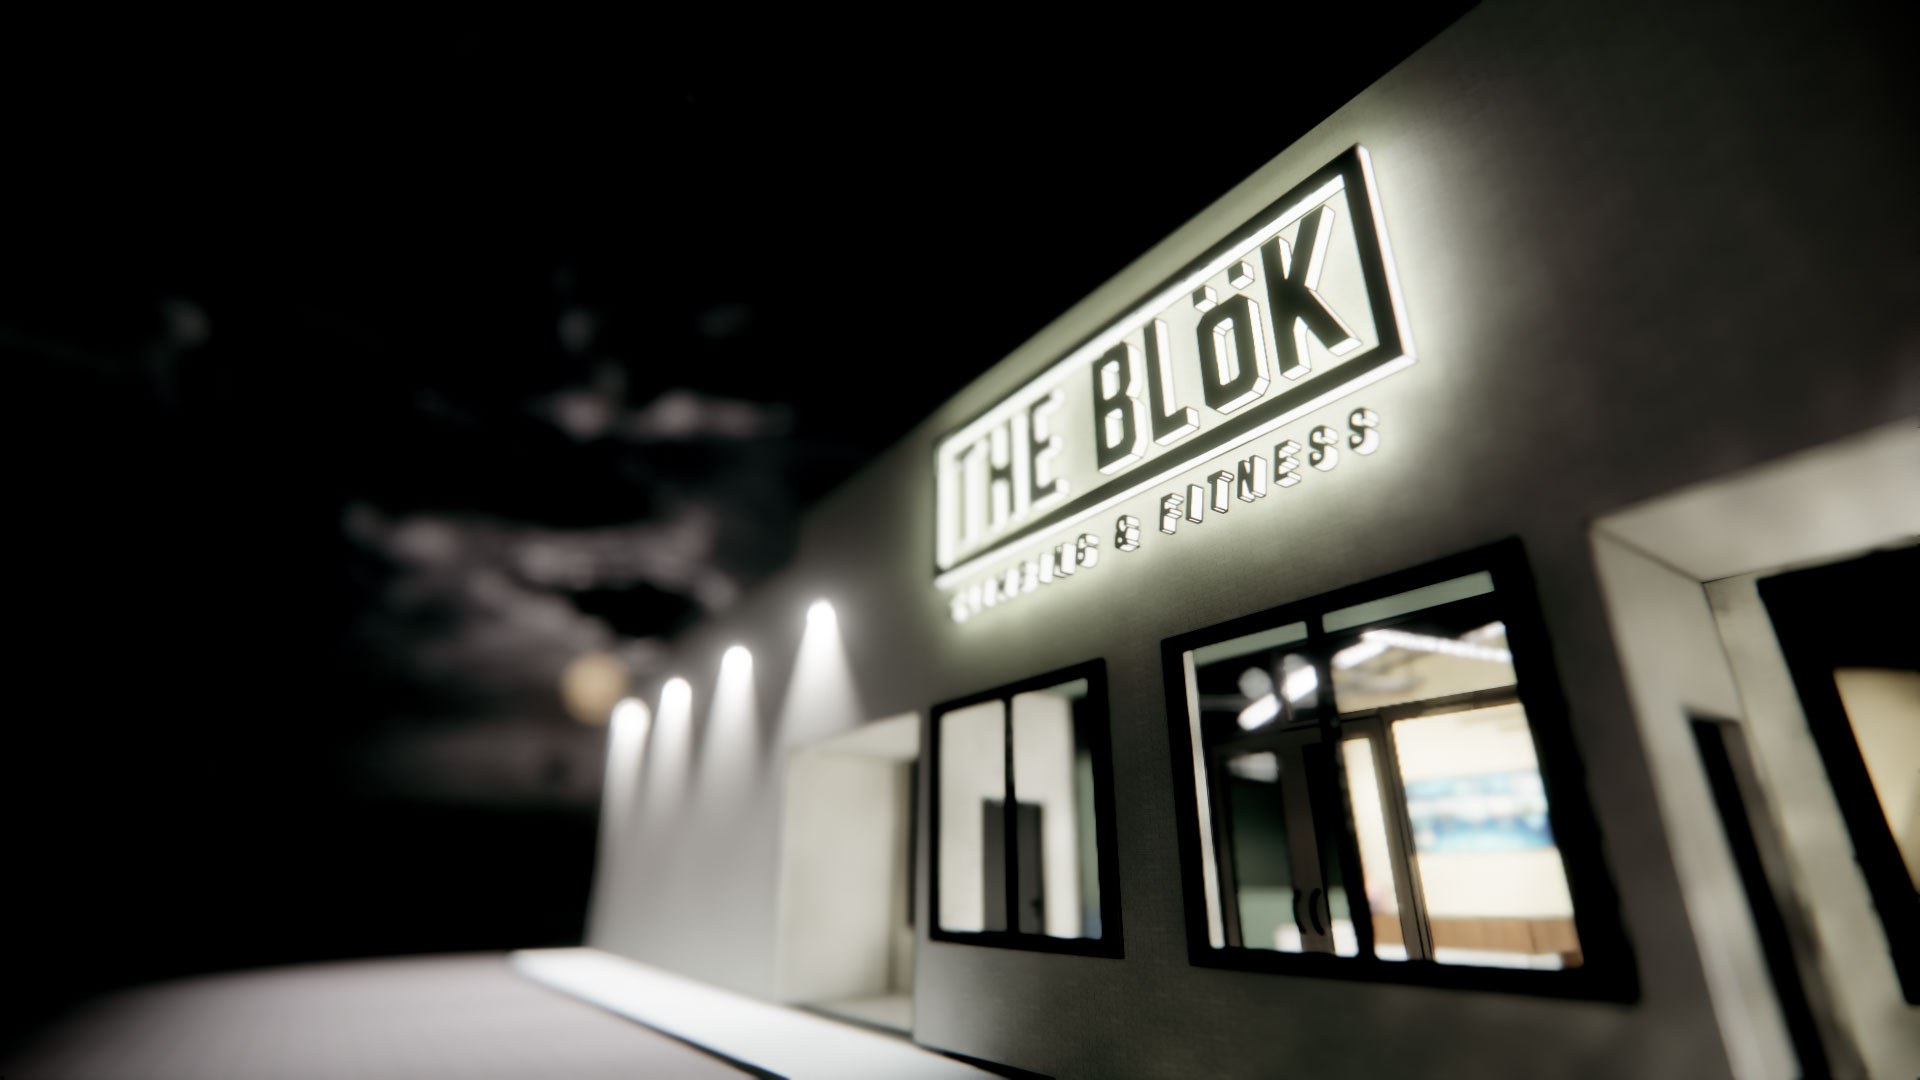 The Blok facility rendering